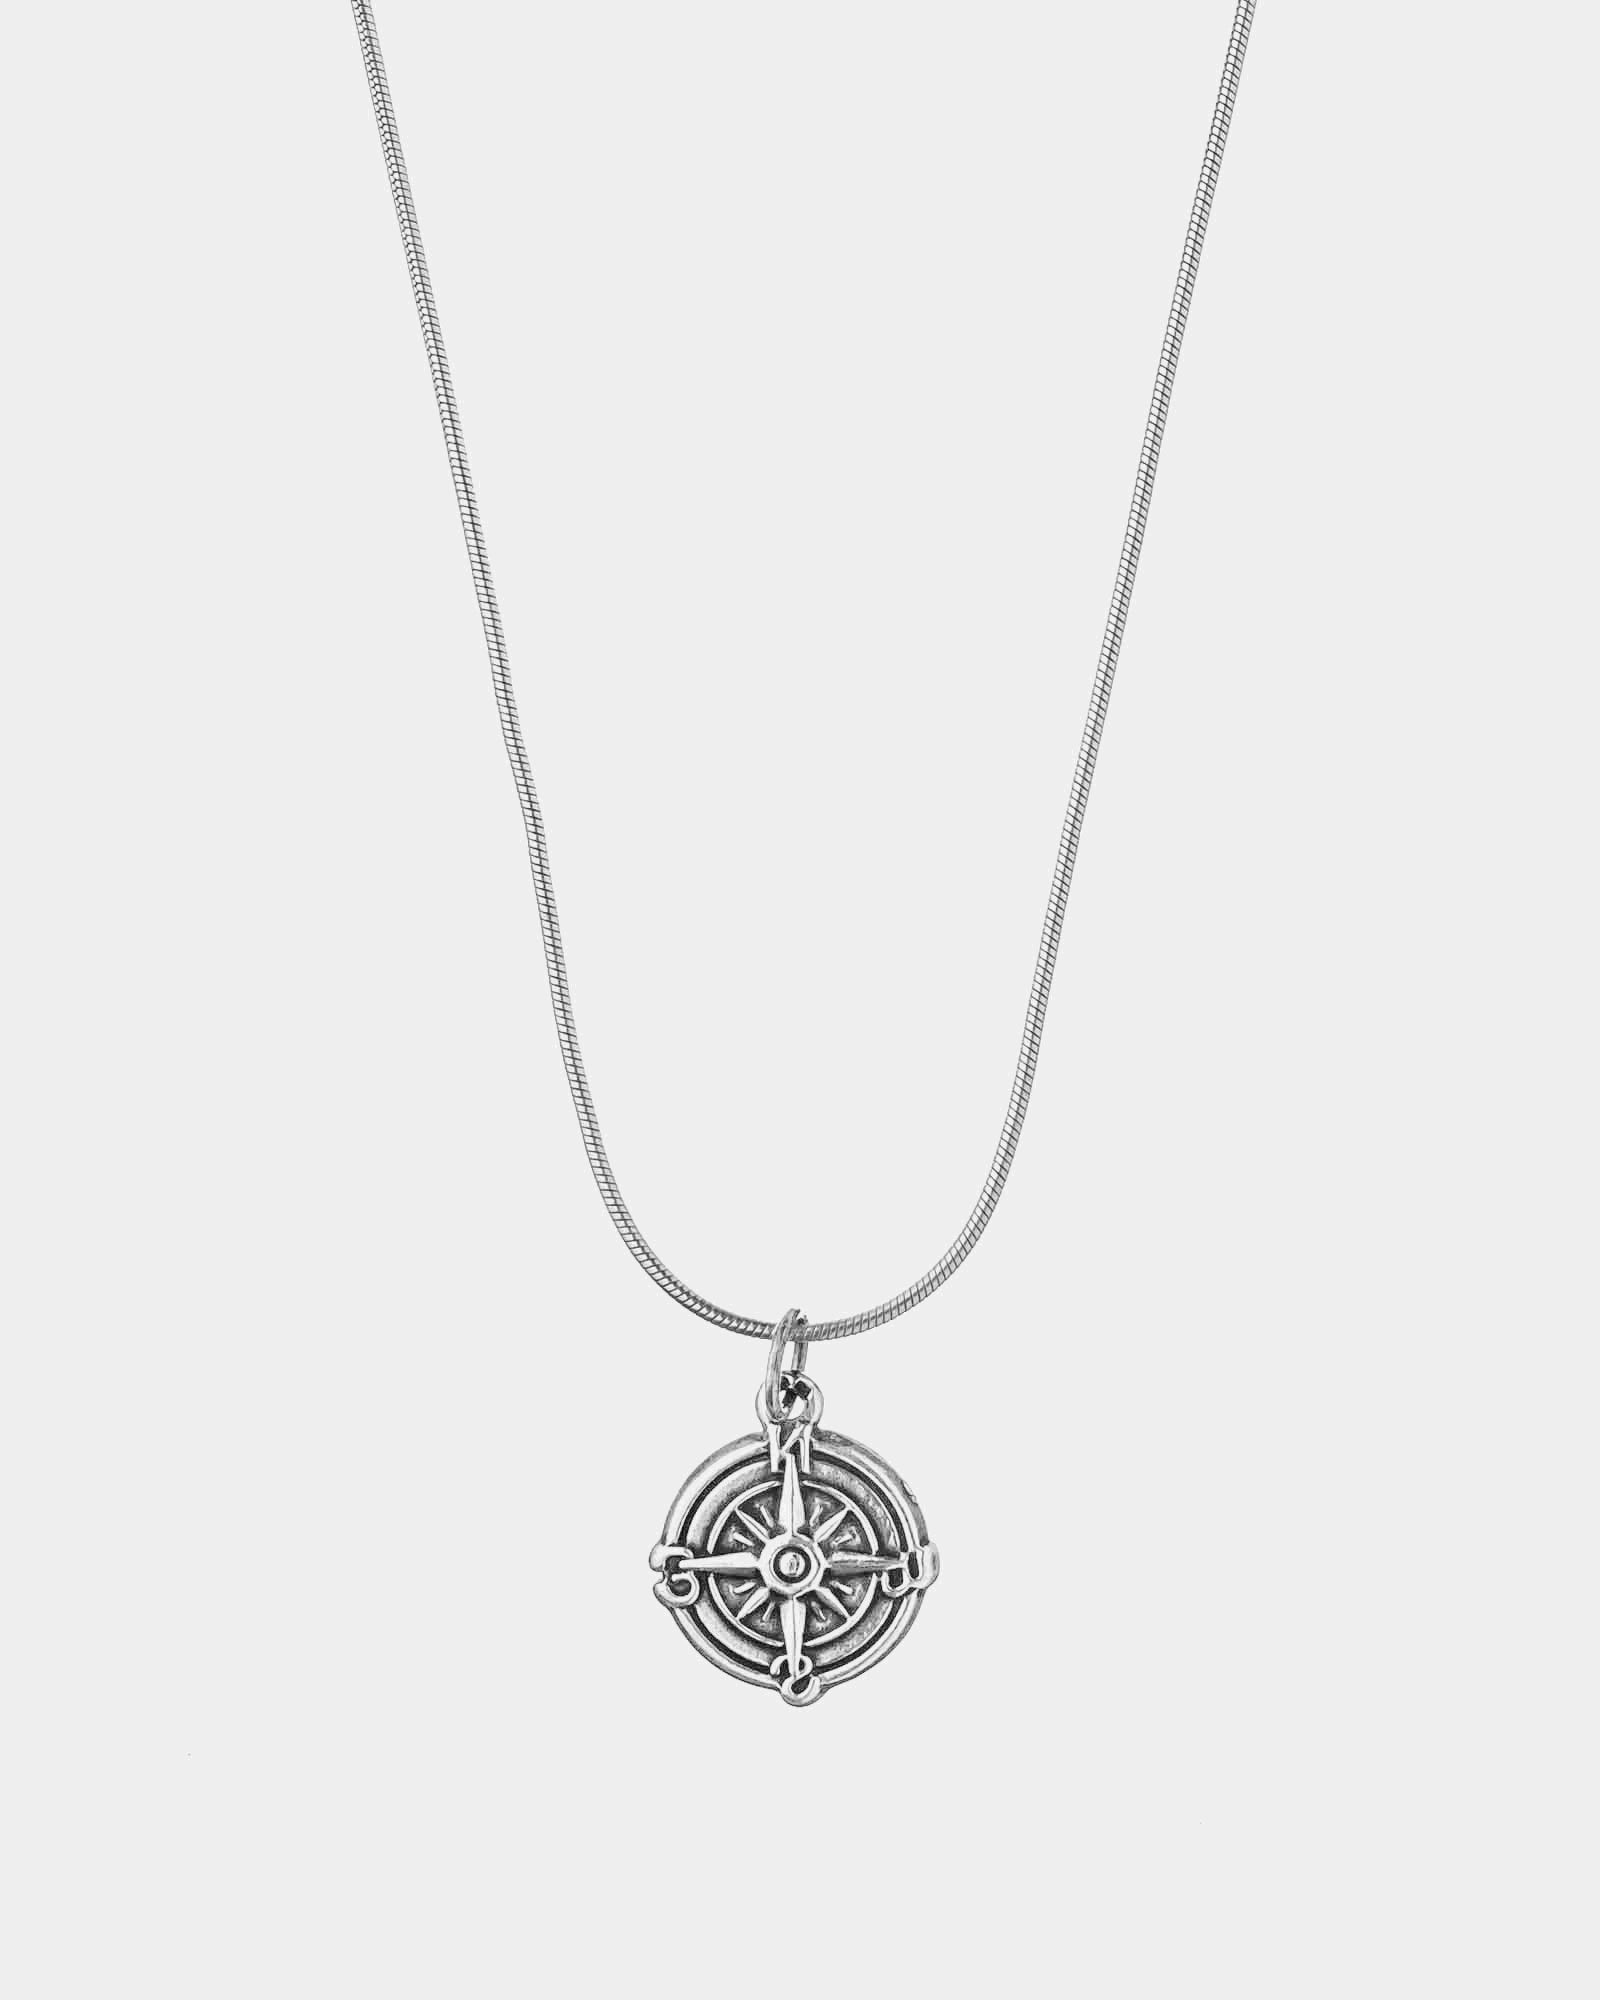 Wind Rose Necklace - 925 Sterling Silver Necklace with 'Wind Rose' Pendant - Online Unissex Jewelry - Dicci